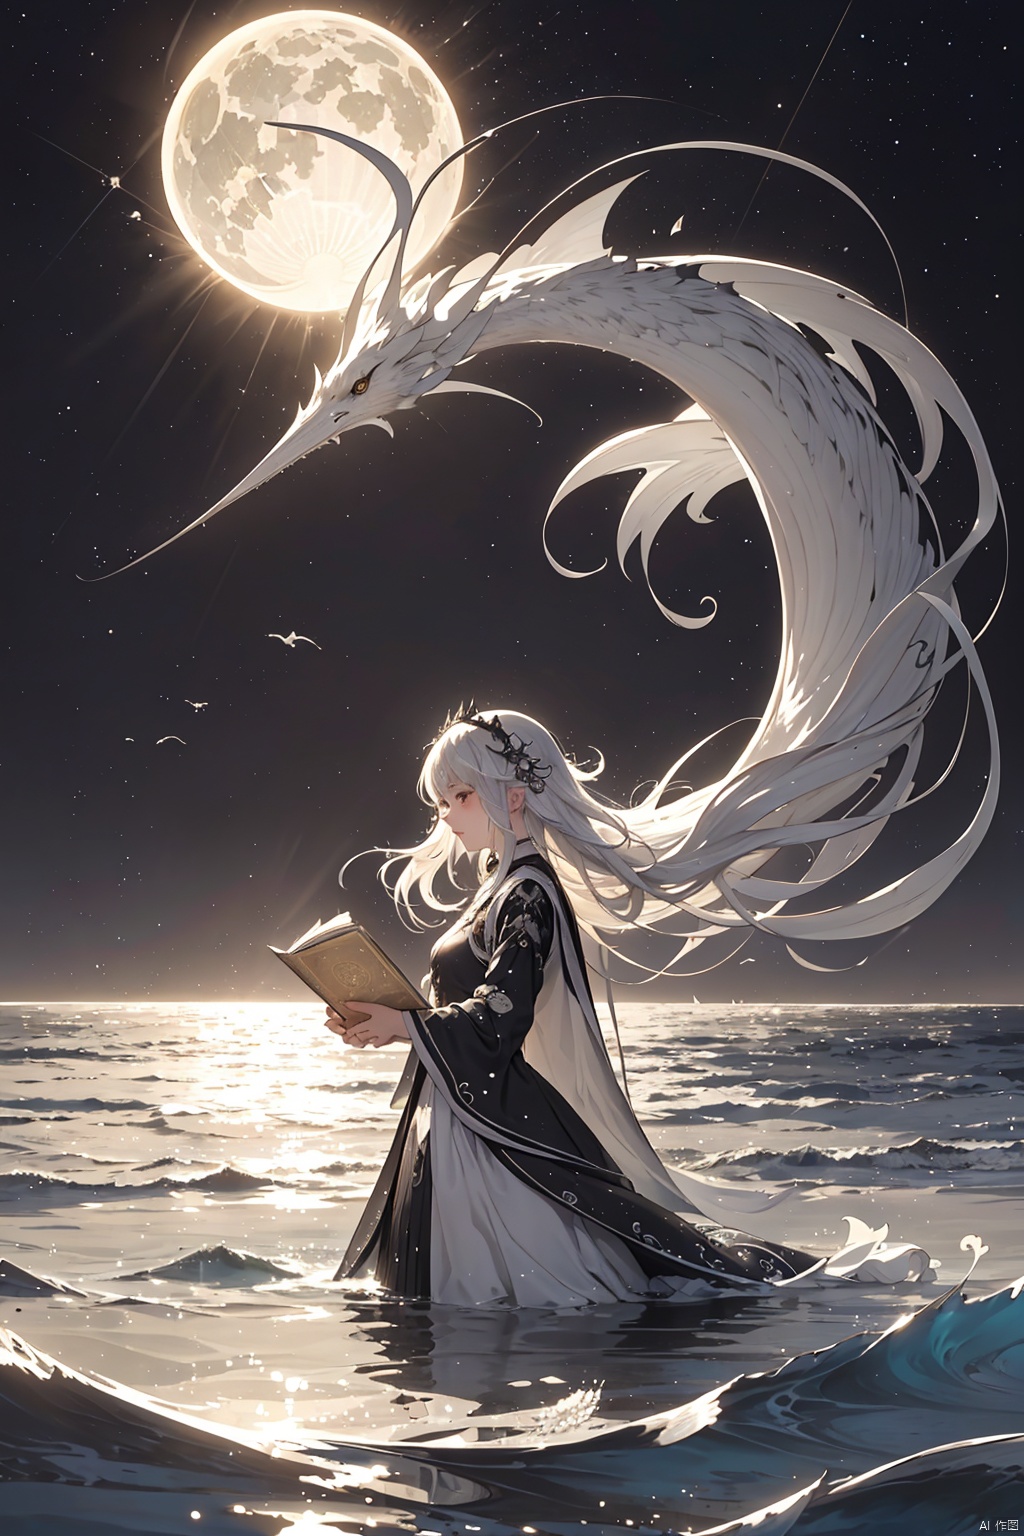  person in the sea, drawing, in the style of whimsical yet eerie animal symbolism, light silver and black, mysterious space, solarpunk, storybook illustration, traditional animation, hurufiyya,CH, (\shen ming shao nv\)